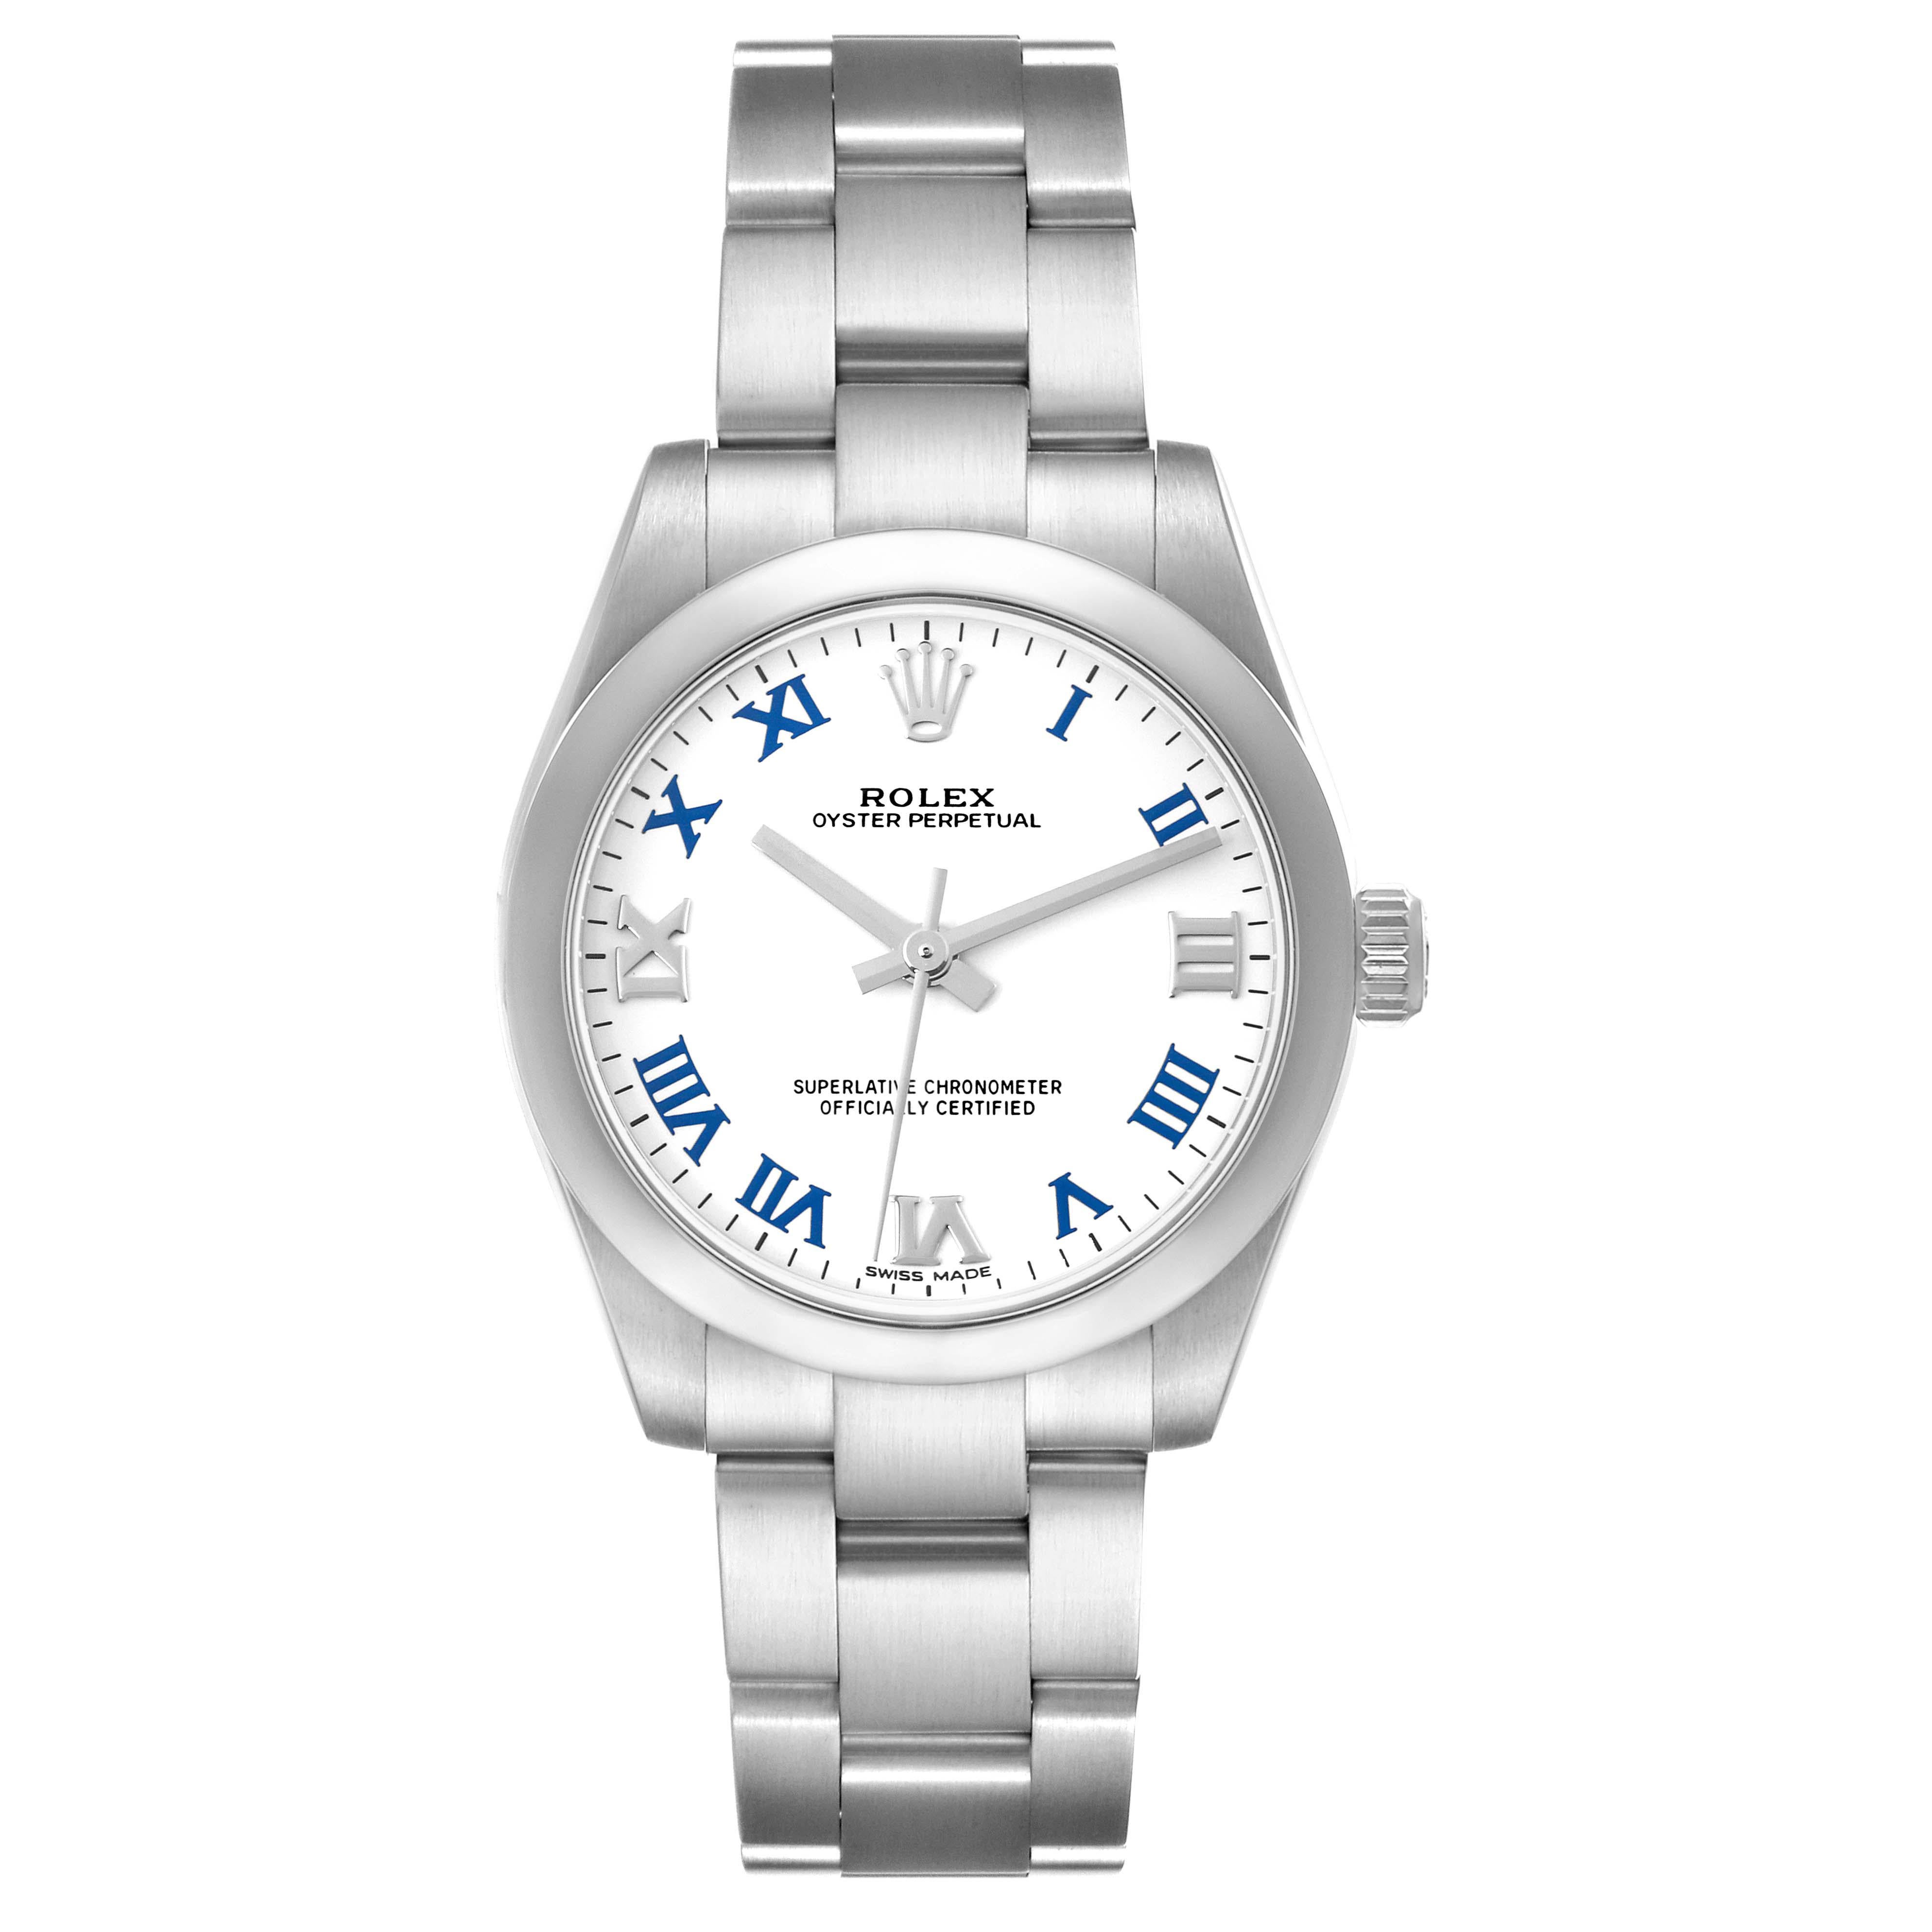 Rolex Oyster Perpetual 31mm Midsize White Dial Ladies Watch 177200 Box Card. Officially certified chronometer automatic self-winding movement. Stainless steel oyster case 31.0 mm in diameter. Rolex logo on the crown. Stainless steel smooth domed